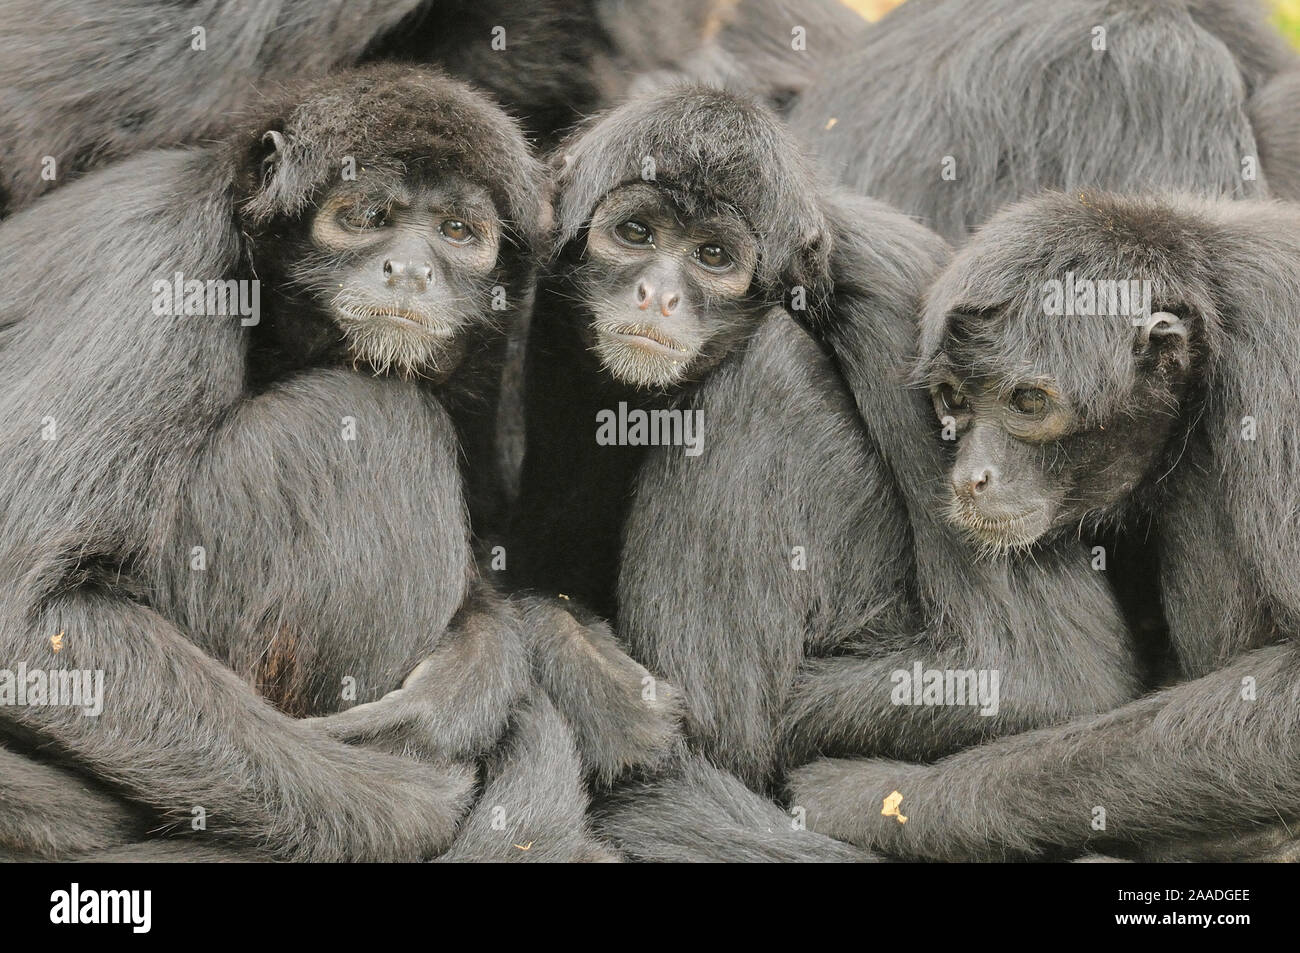 Colombian spider monkey (Ateles fusciceps rufiventris) group. Captive, Critically endangered species. Stock Photo